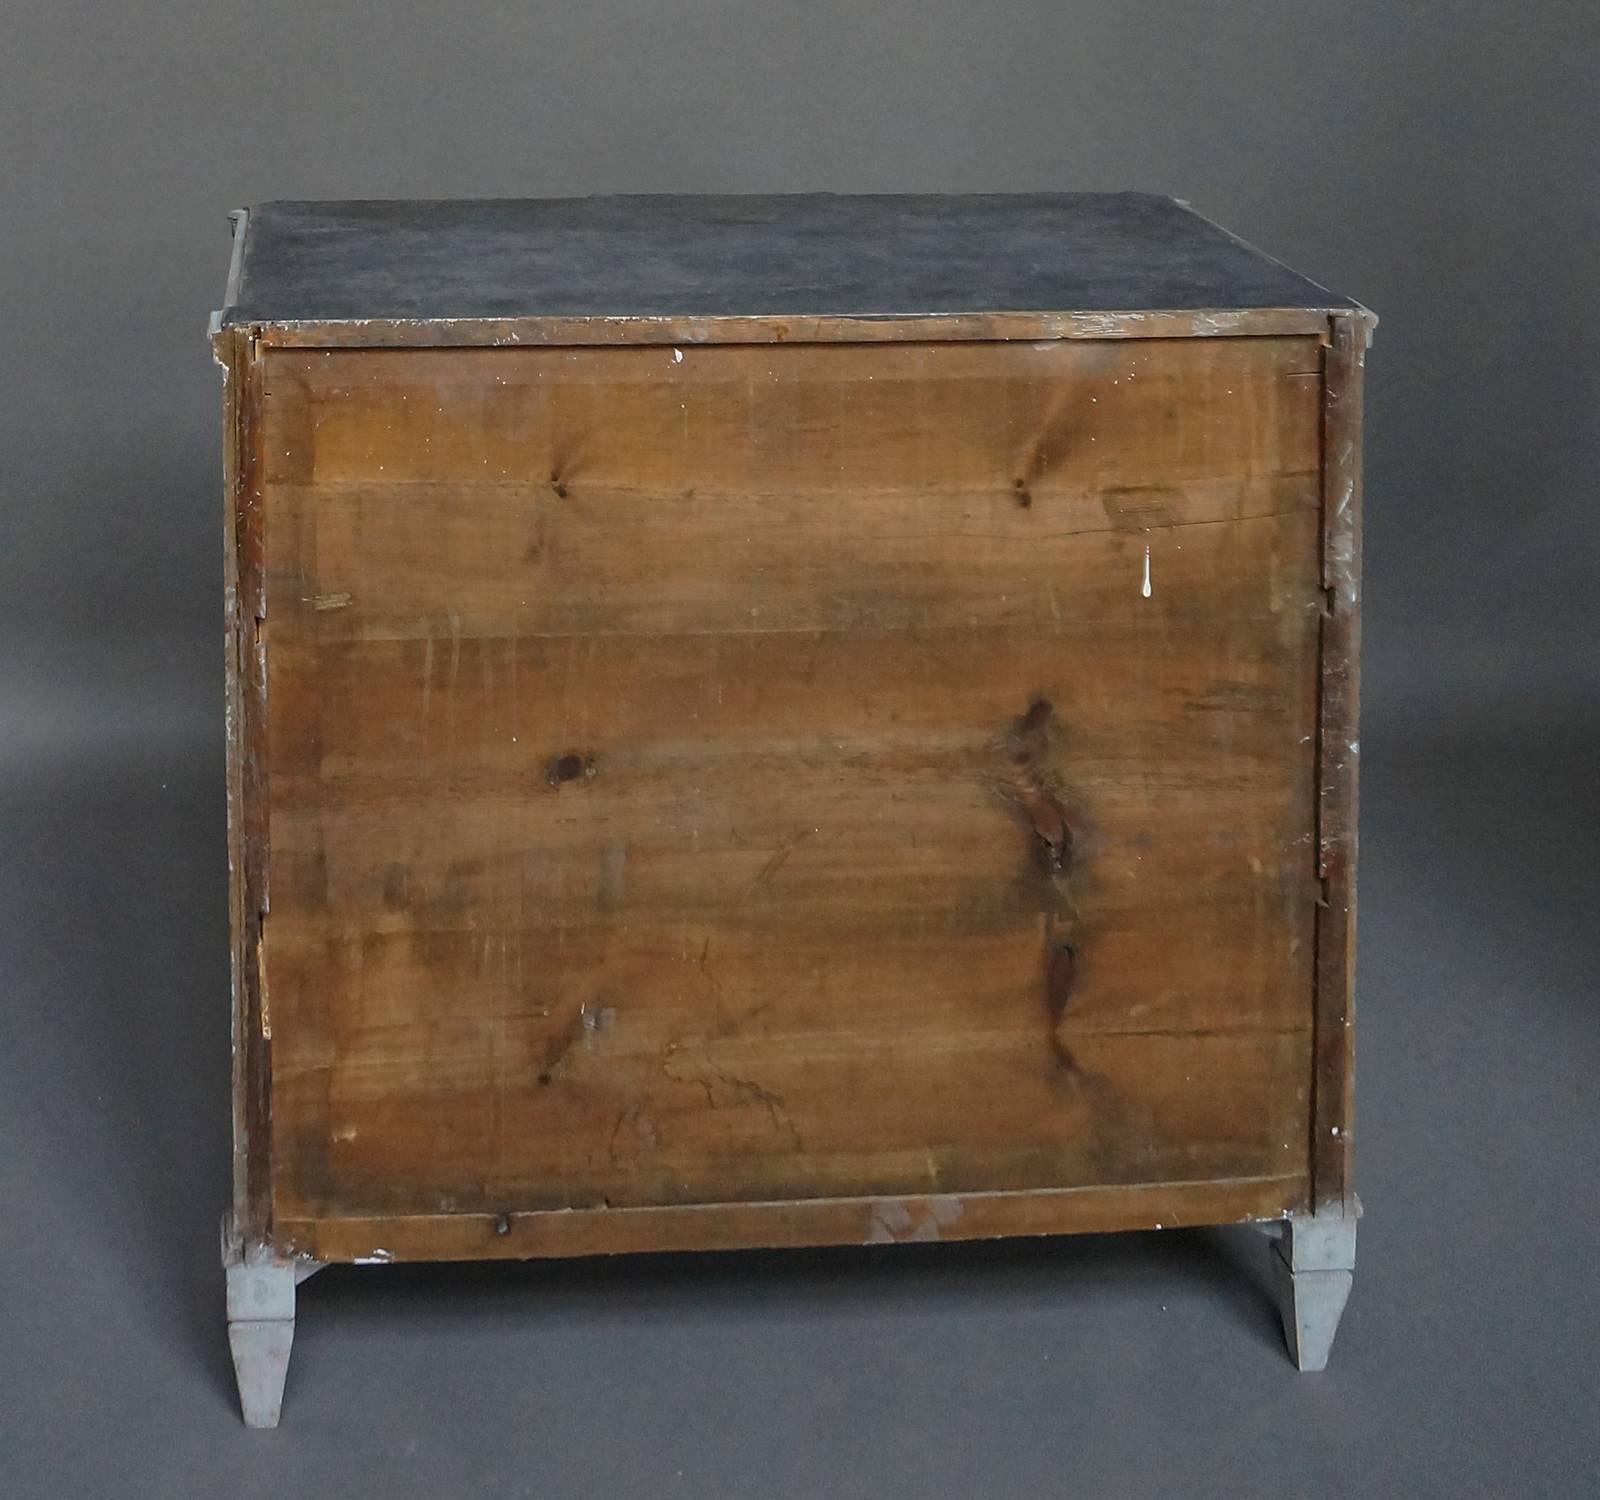 Wood Gustavian Style Commode in Worn Gray Paint